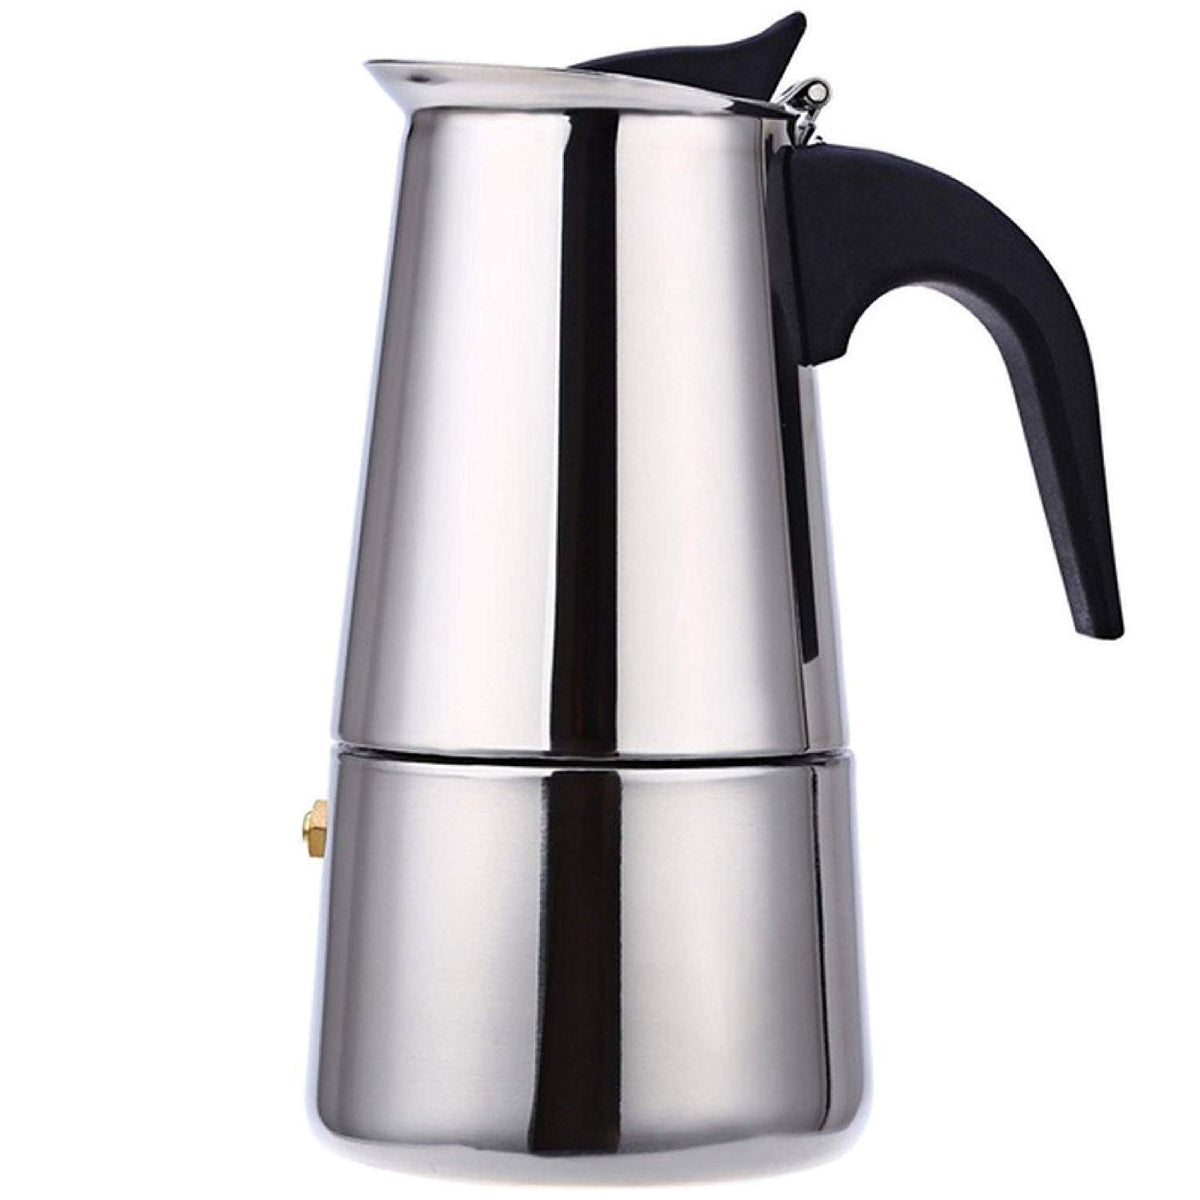 300ml Portable Electric Coffee Maker Stainless Steel Espresso